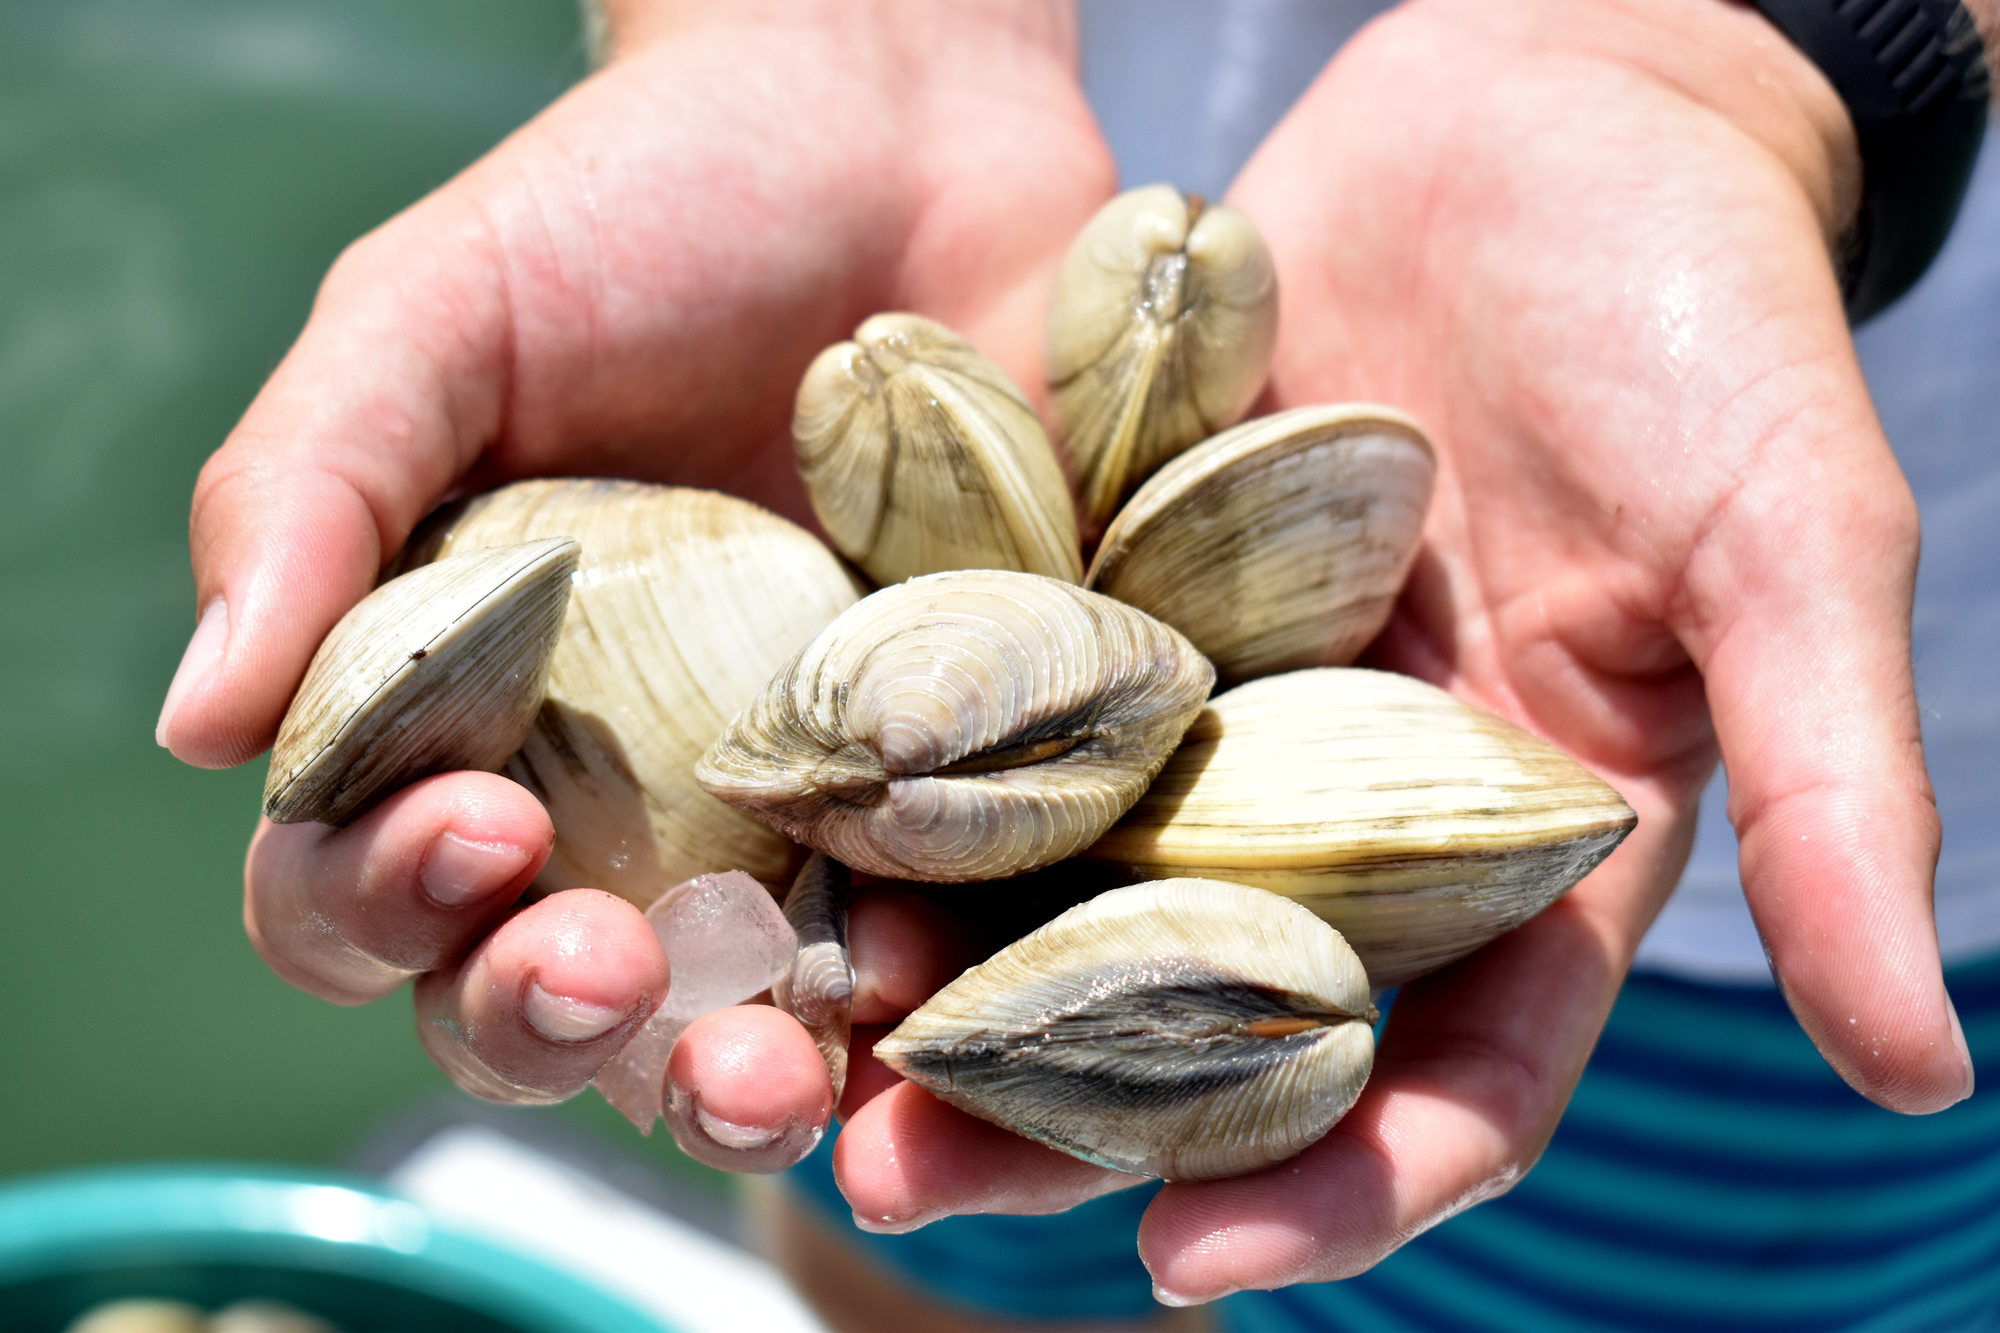 Sarasota Bay Watch and volunteers released 30,000 clams into the Bay on June 16.